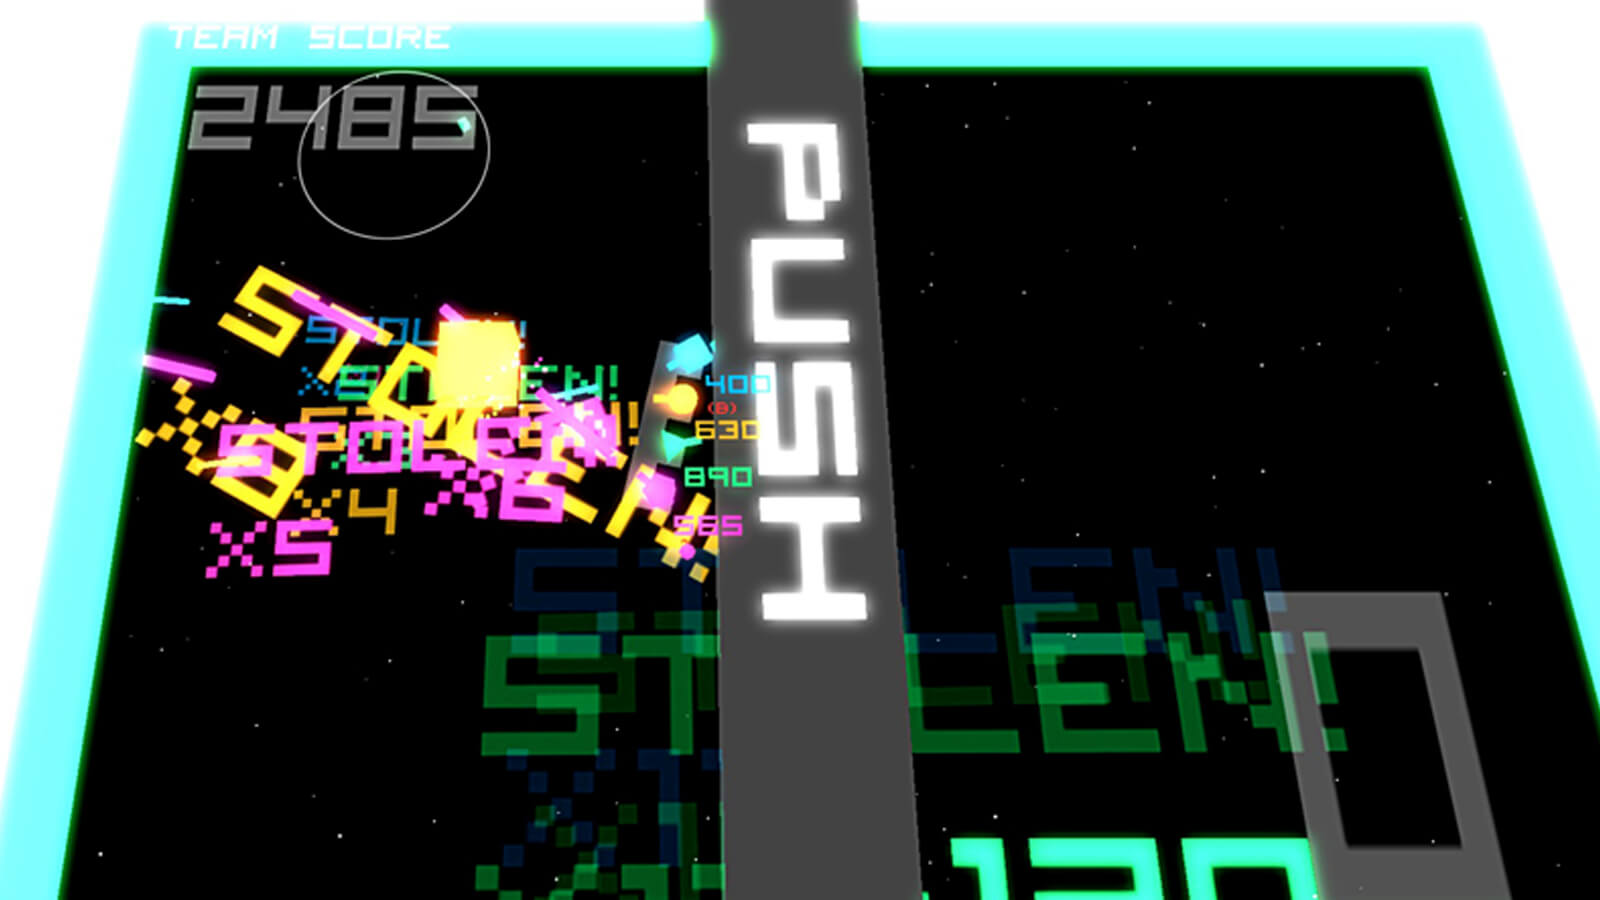 The words "stolen" and pixelated point modifiers cascade on top of each other.